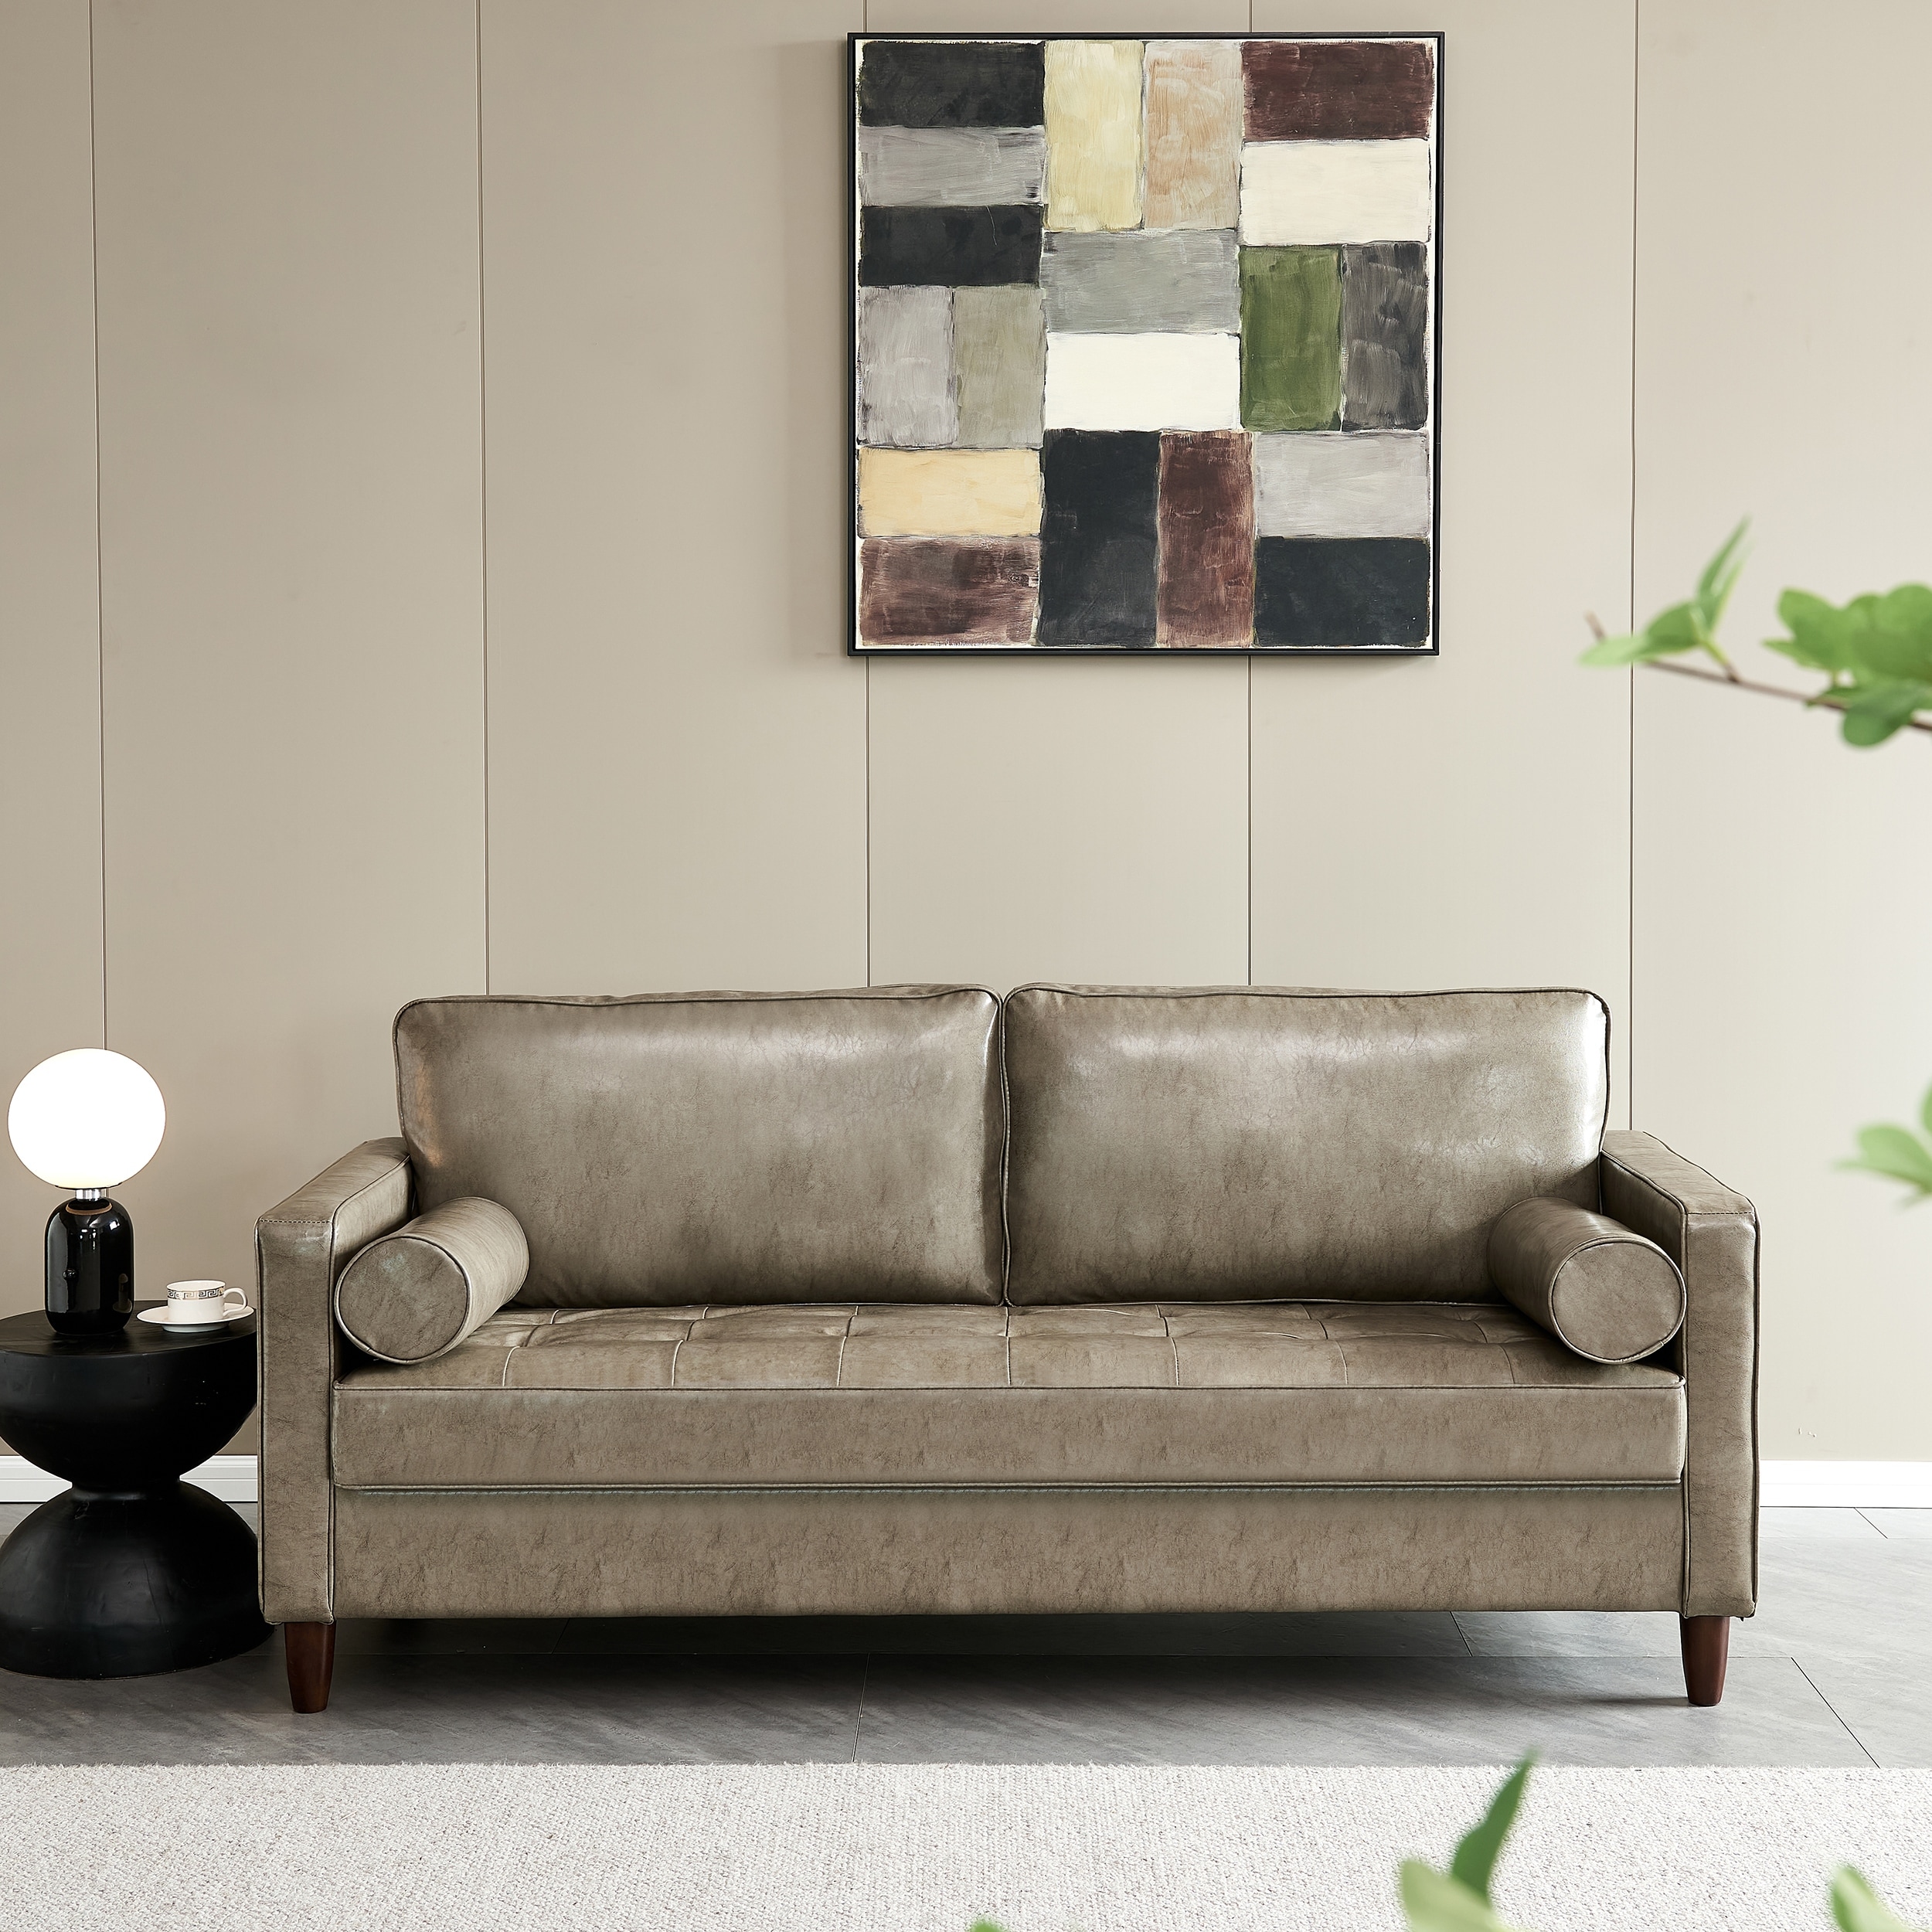 https://ak1.ostkcdn.com/images/products/is/images/direct/5b5a6de1cd233368d244125545f6b5a8a5142047/Modern-Faux-Leather-Sofa-Removable-Back-Cushions-Couch-with-Hidden-Storage-Sofa-and-Solid-Wood-Legs-Sofa-for-Living-Room.jpg